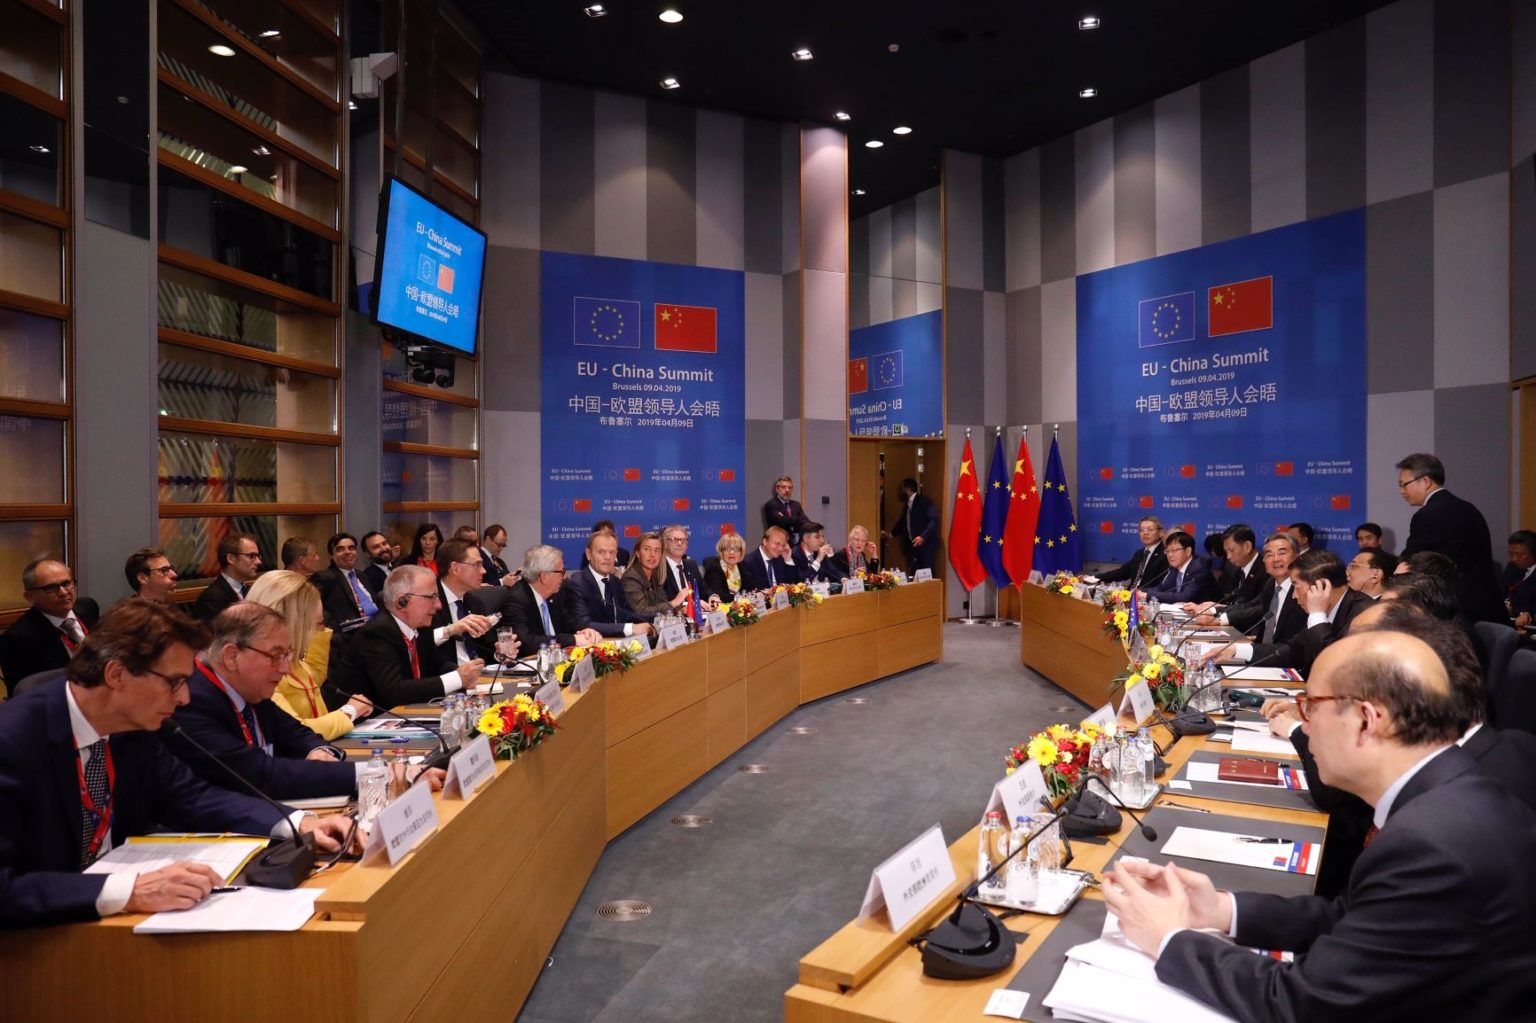 PRESS RELEASE: WUC Calls for EU to Address Uyghur Genocide During EU-China Summit